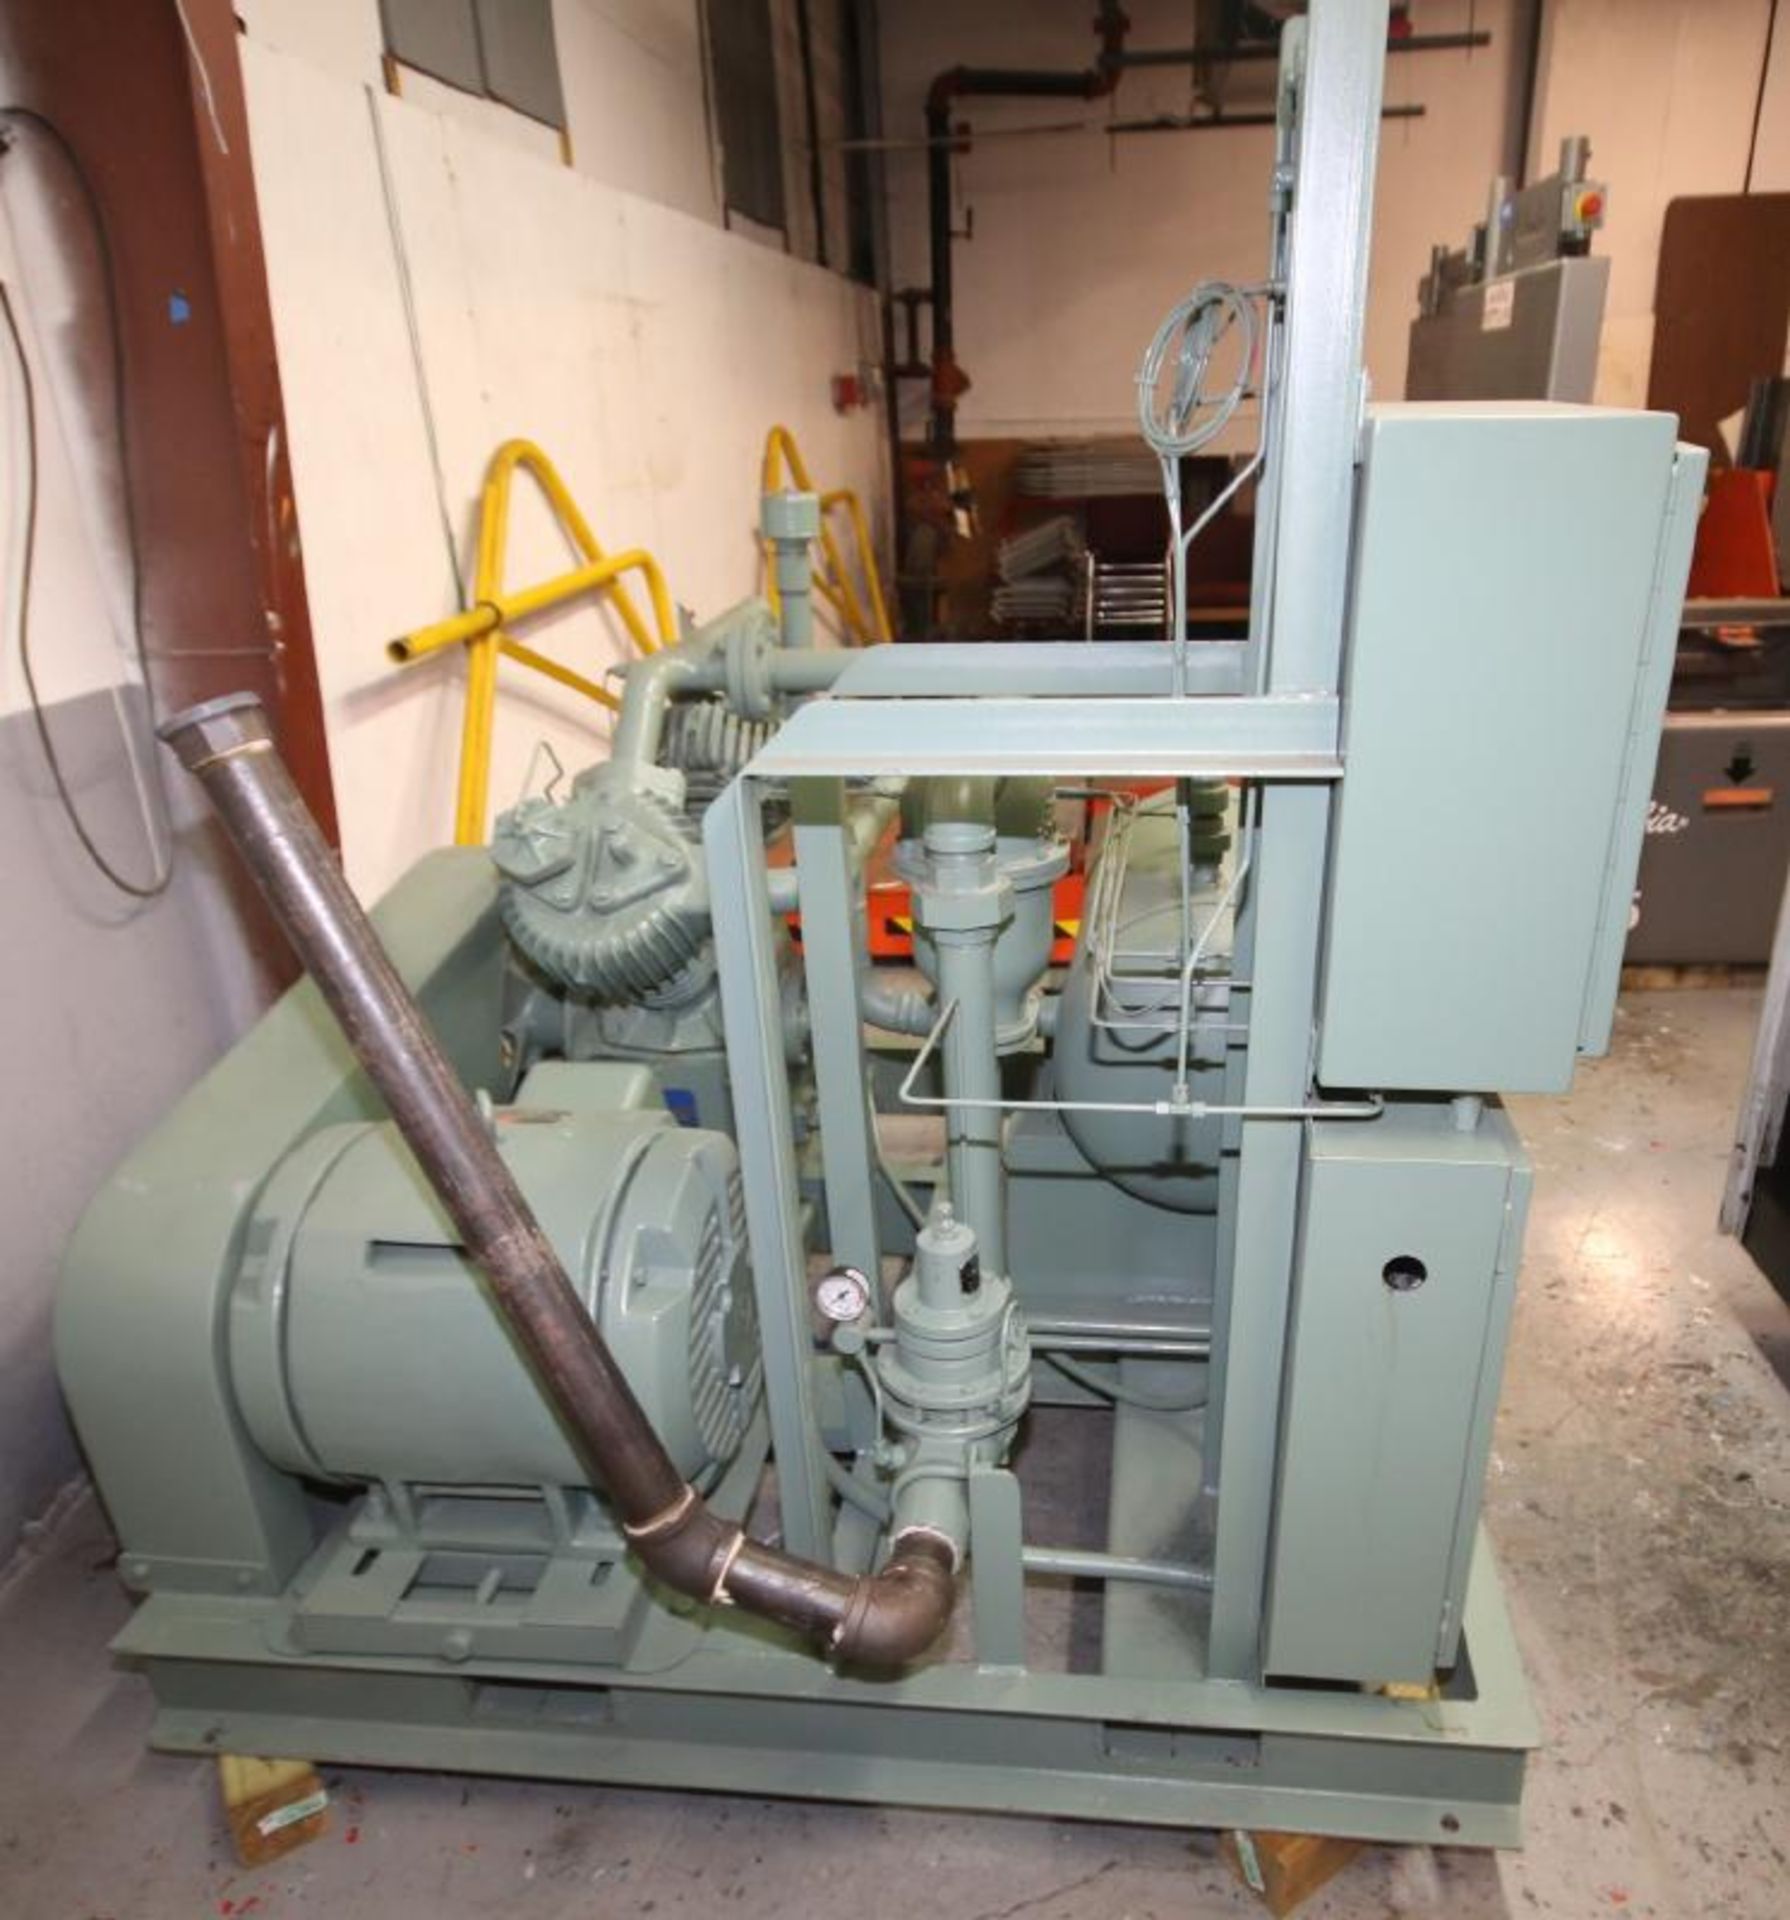 Dearing Compressor & Pump Company 40 hp Reciprocating Air Compressor, with Creole 2 Cylinder